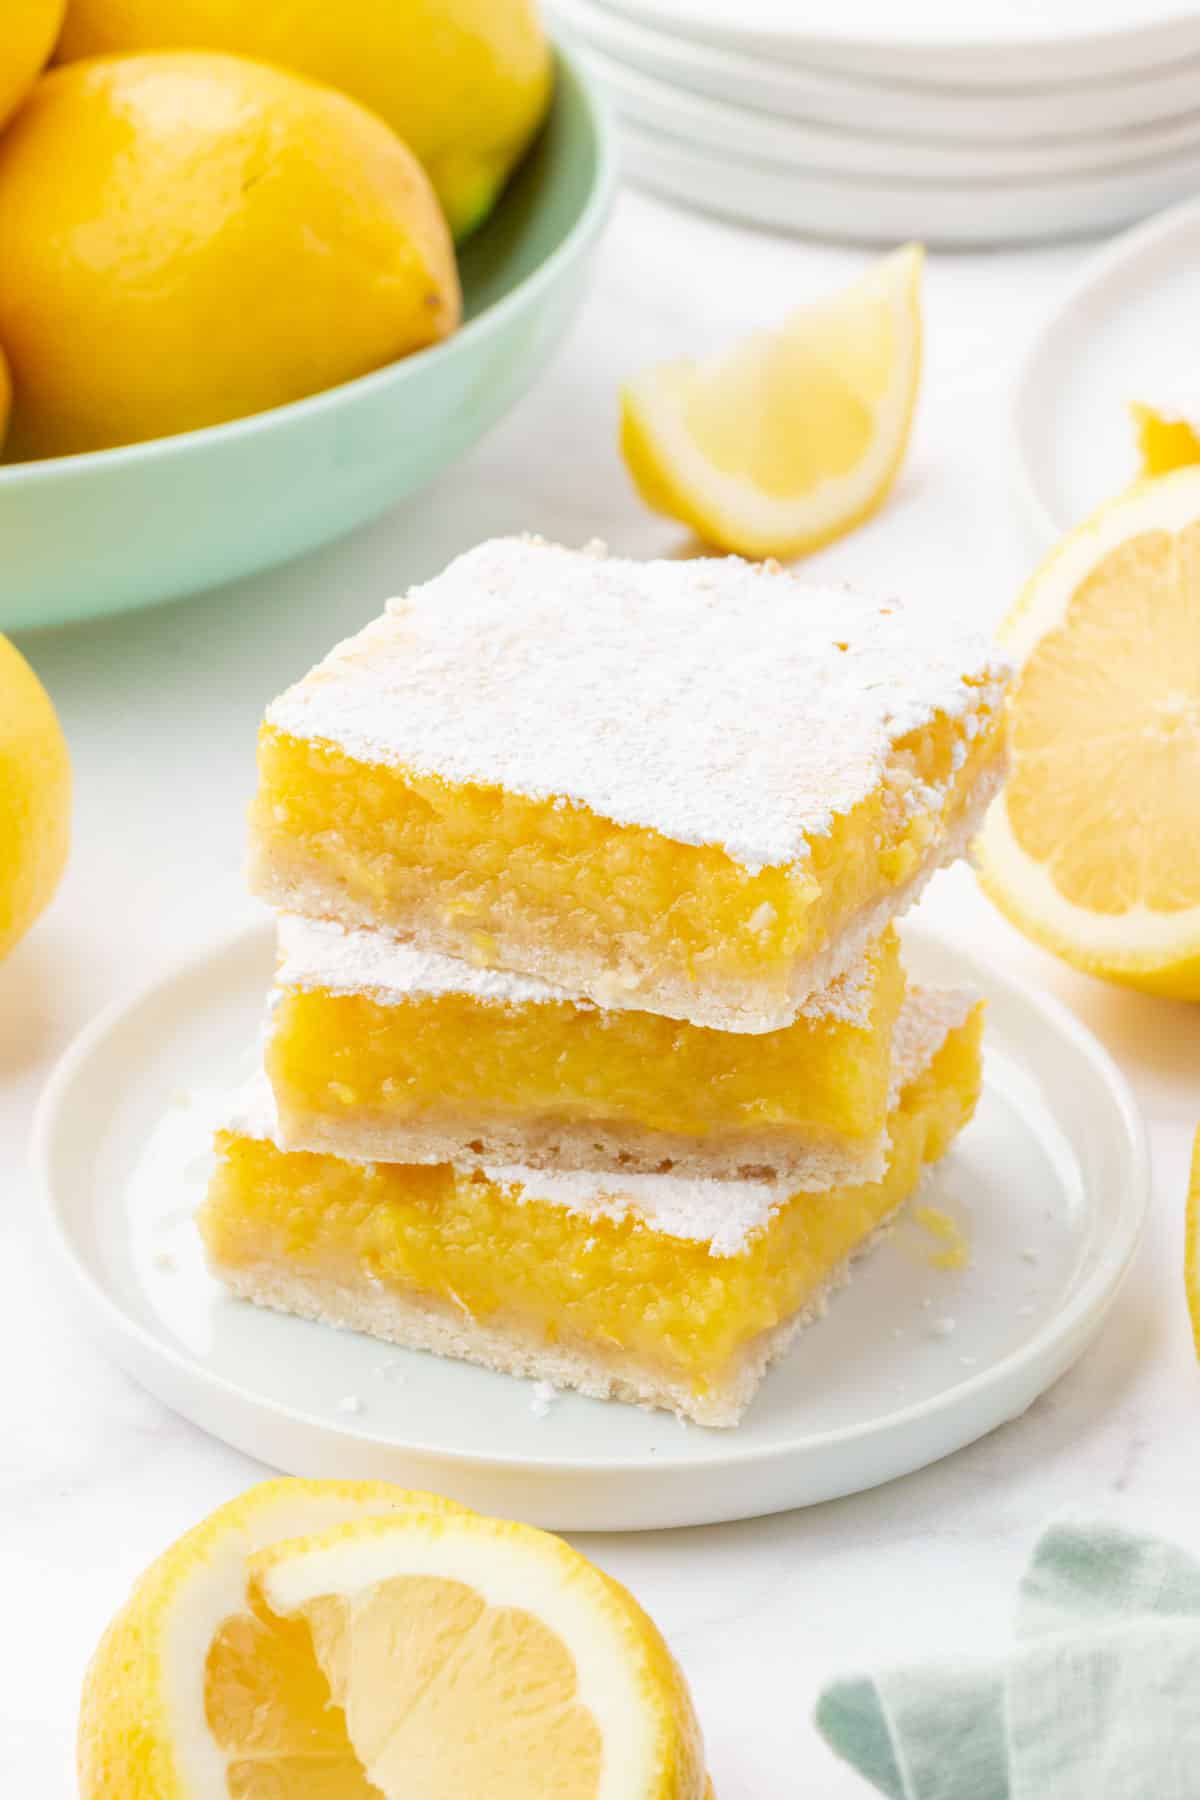 A stack of three gf lemon bars on a dessert plate with a bowl of lemons in teh background and lemon slices around the lemons.